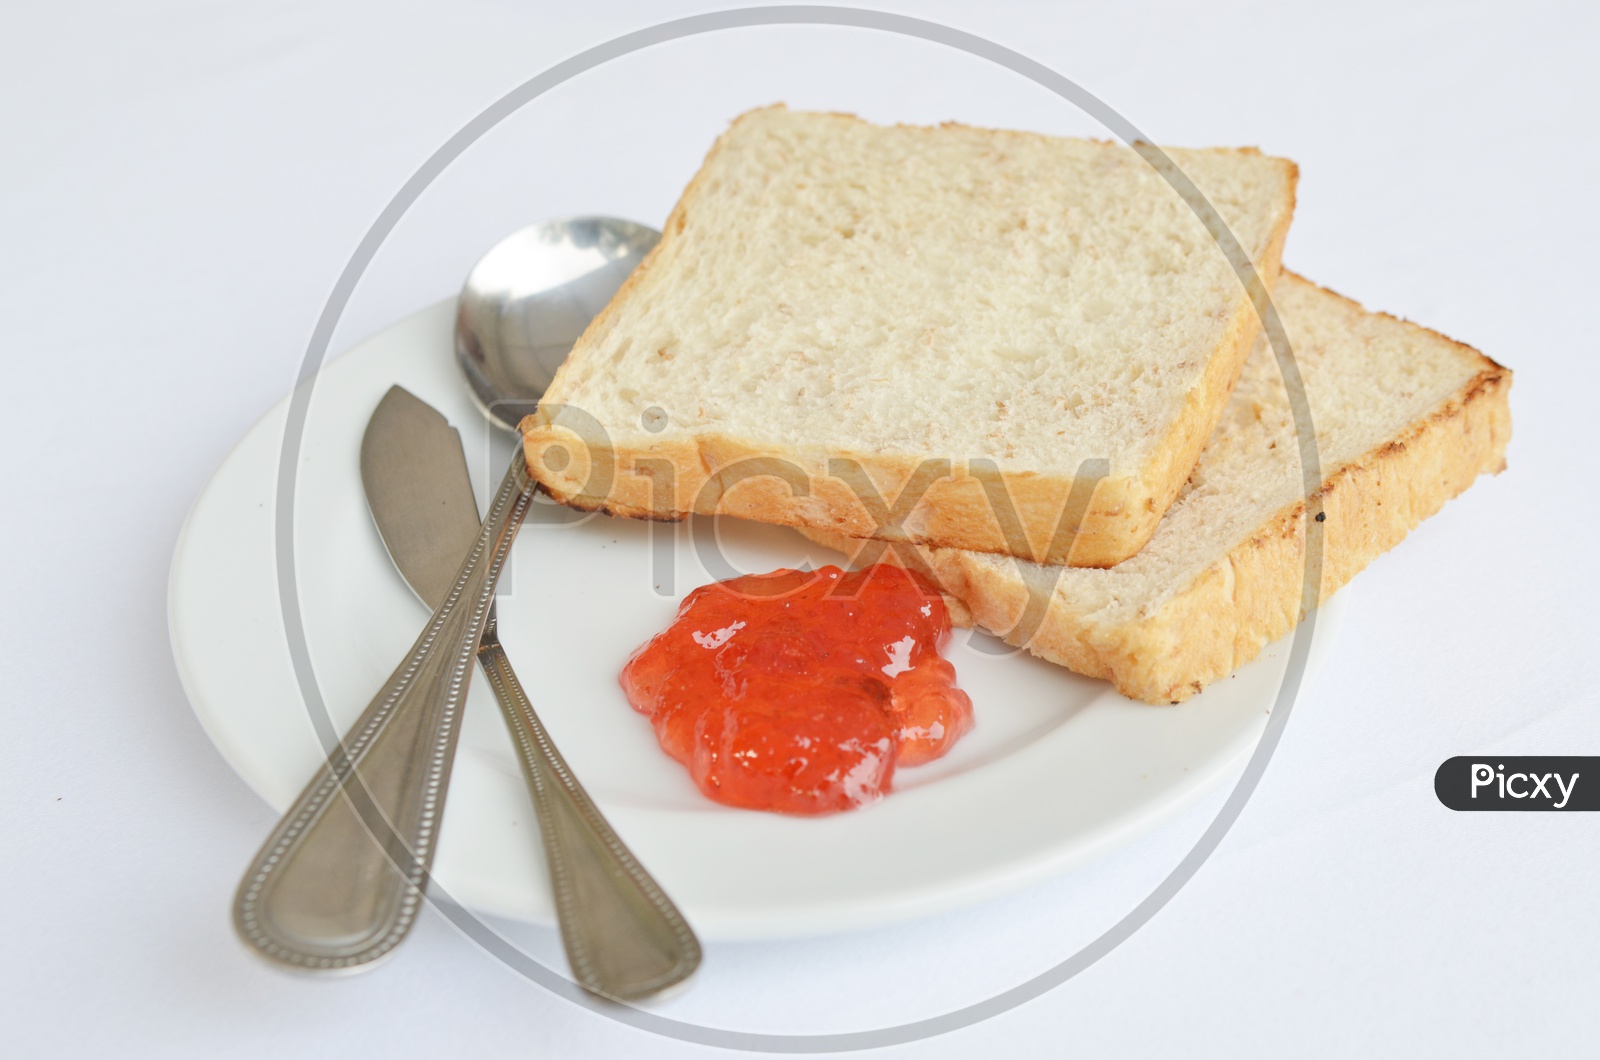 A good piece of toast with  Strawberry  Jam and Butter  Served in a Plate